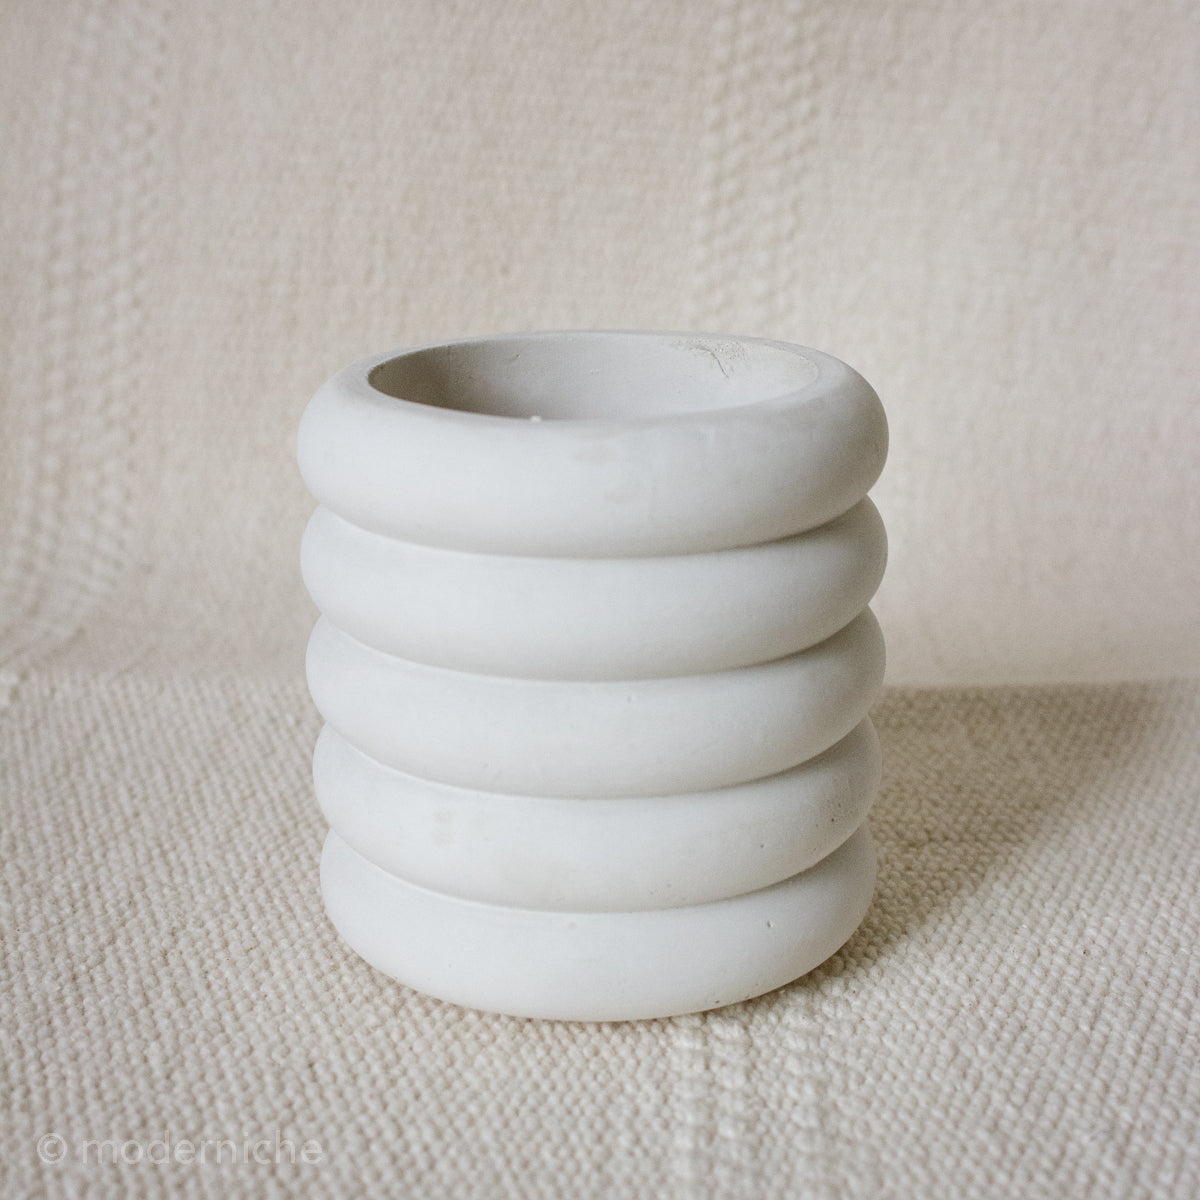 7oz Empty Concrete Candle Vessel with Lid - Scallop Style, Wholesale  Candles, Candle Making